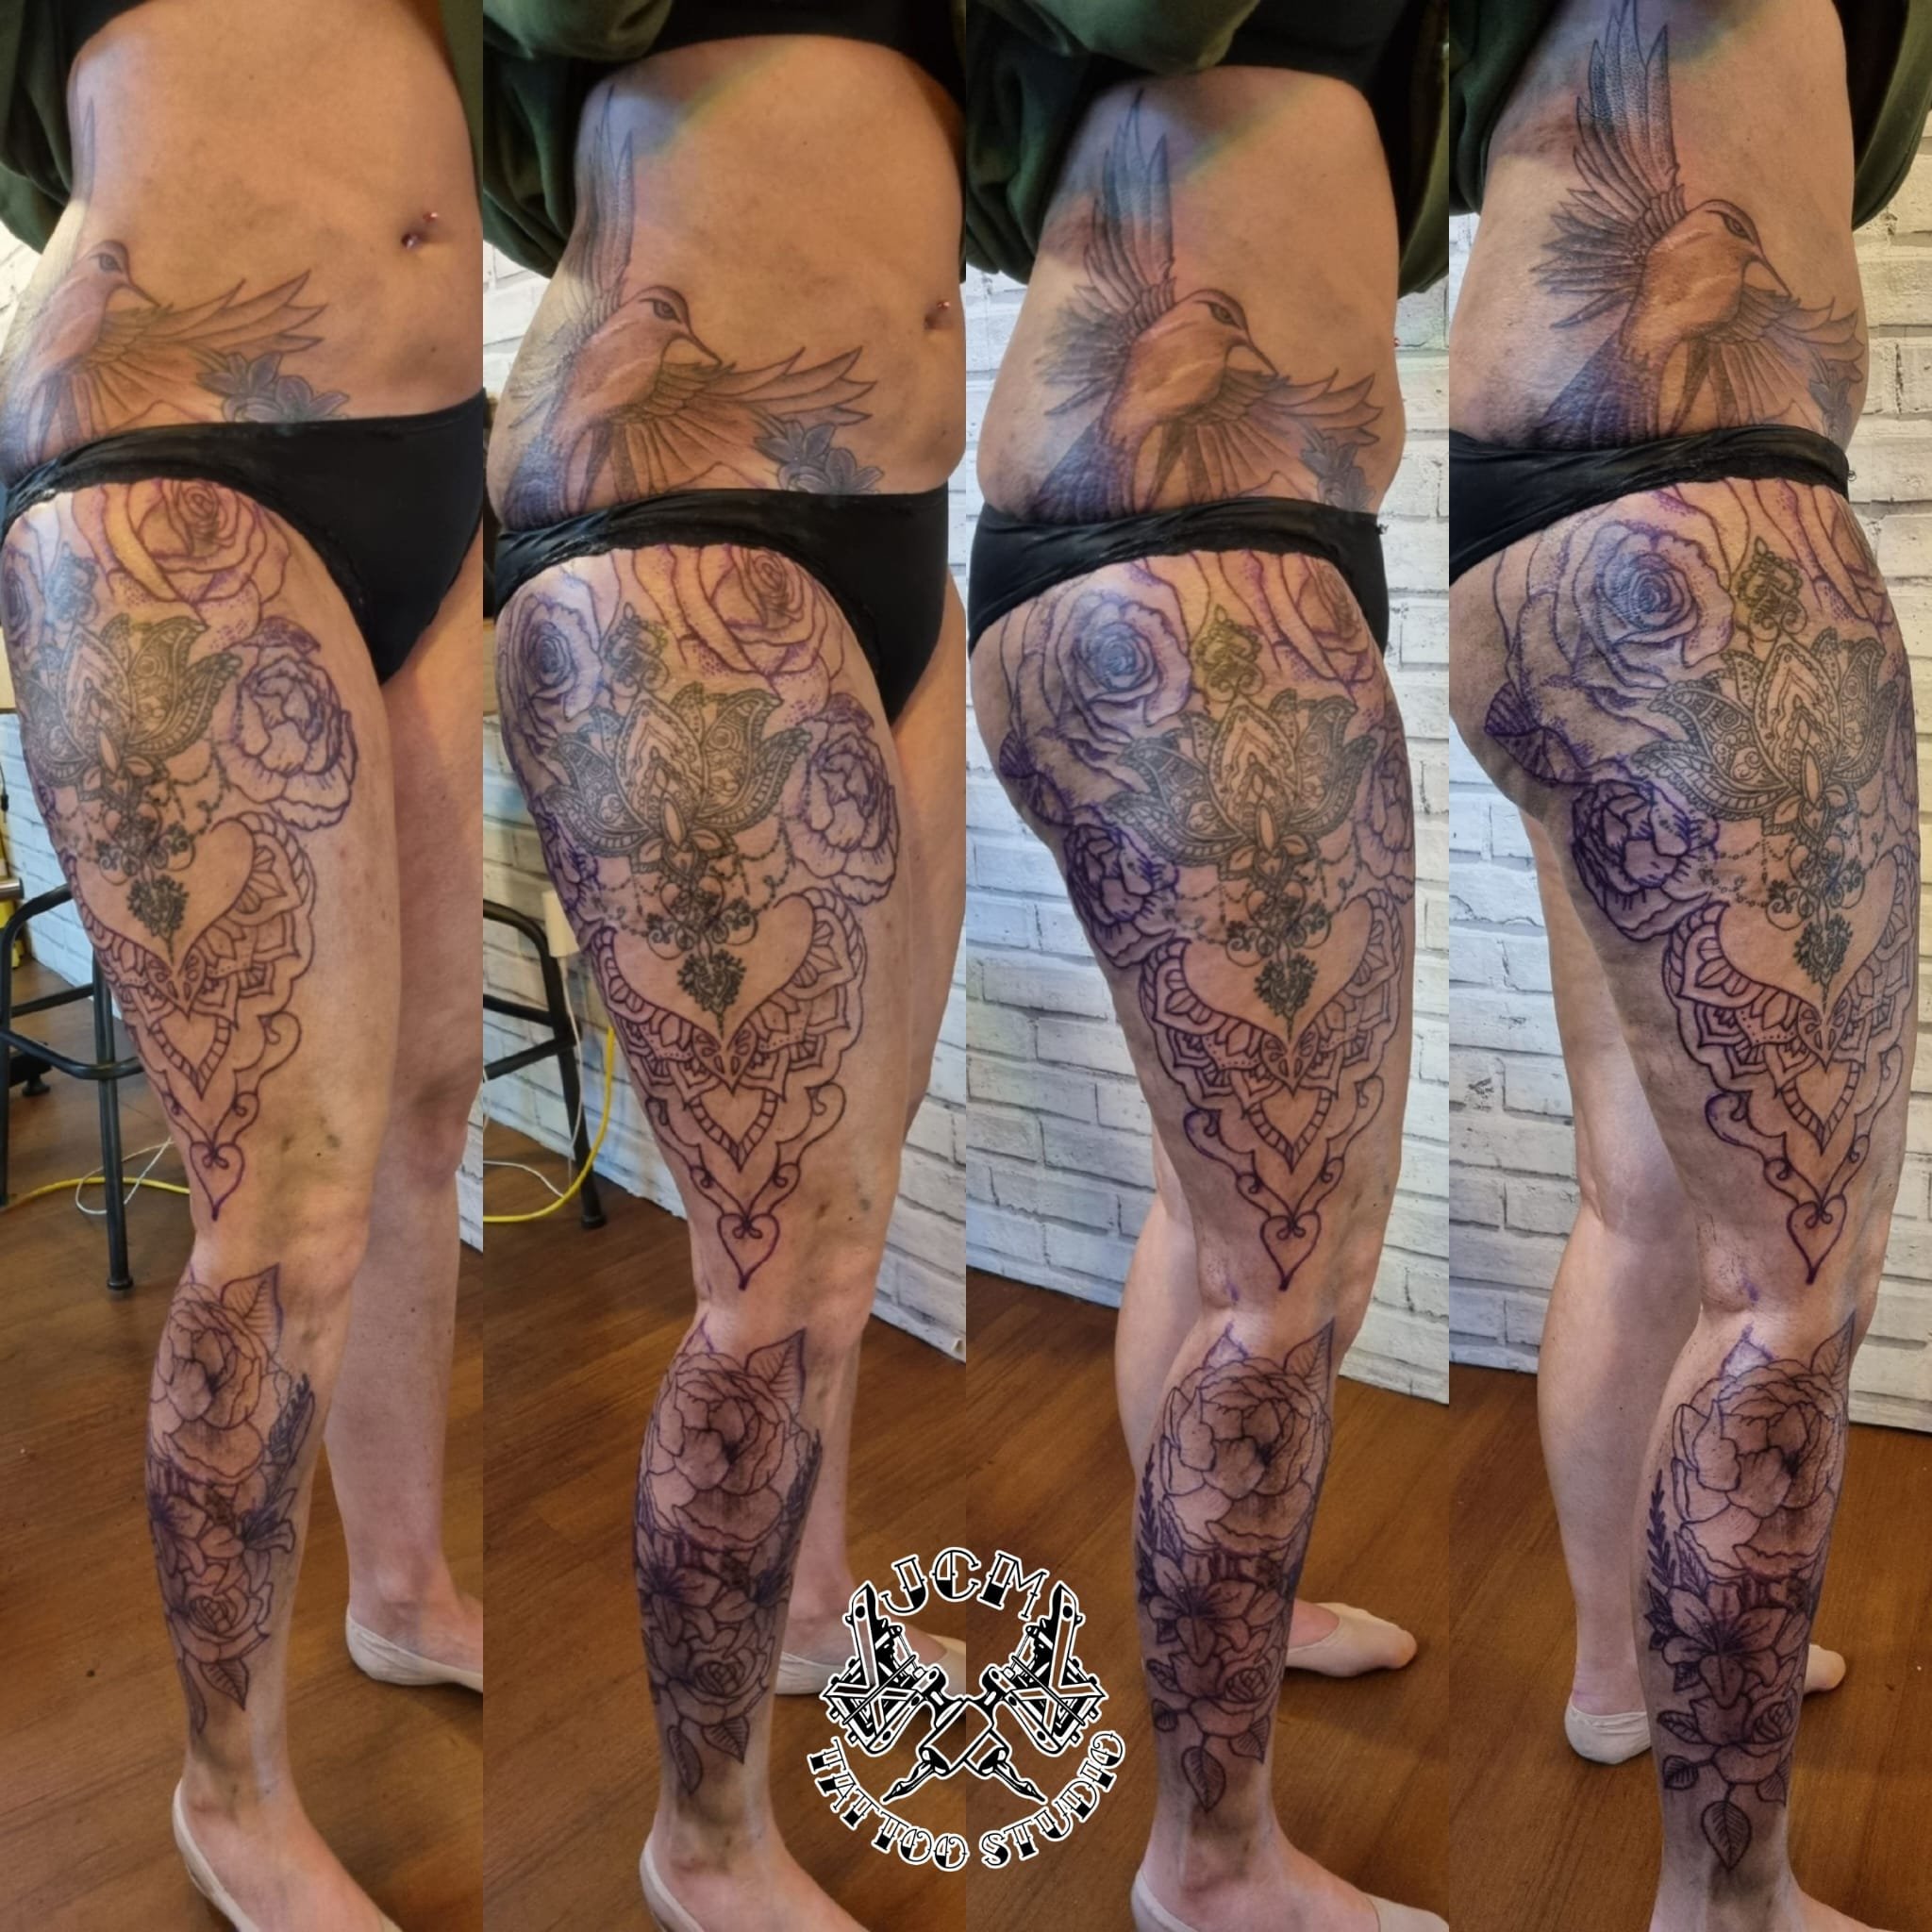 10 Thigh Tattoos to Show Off in Your Swimsuit This Summer